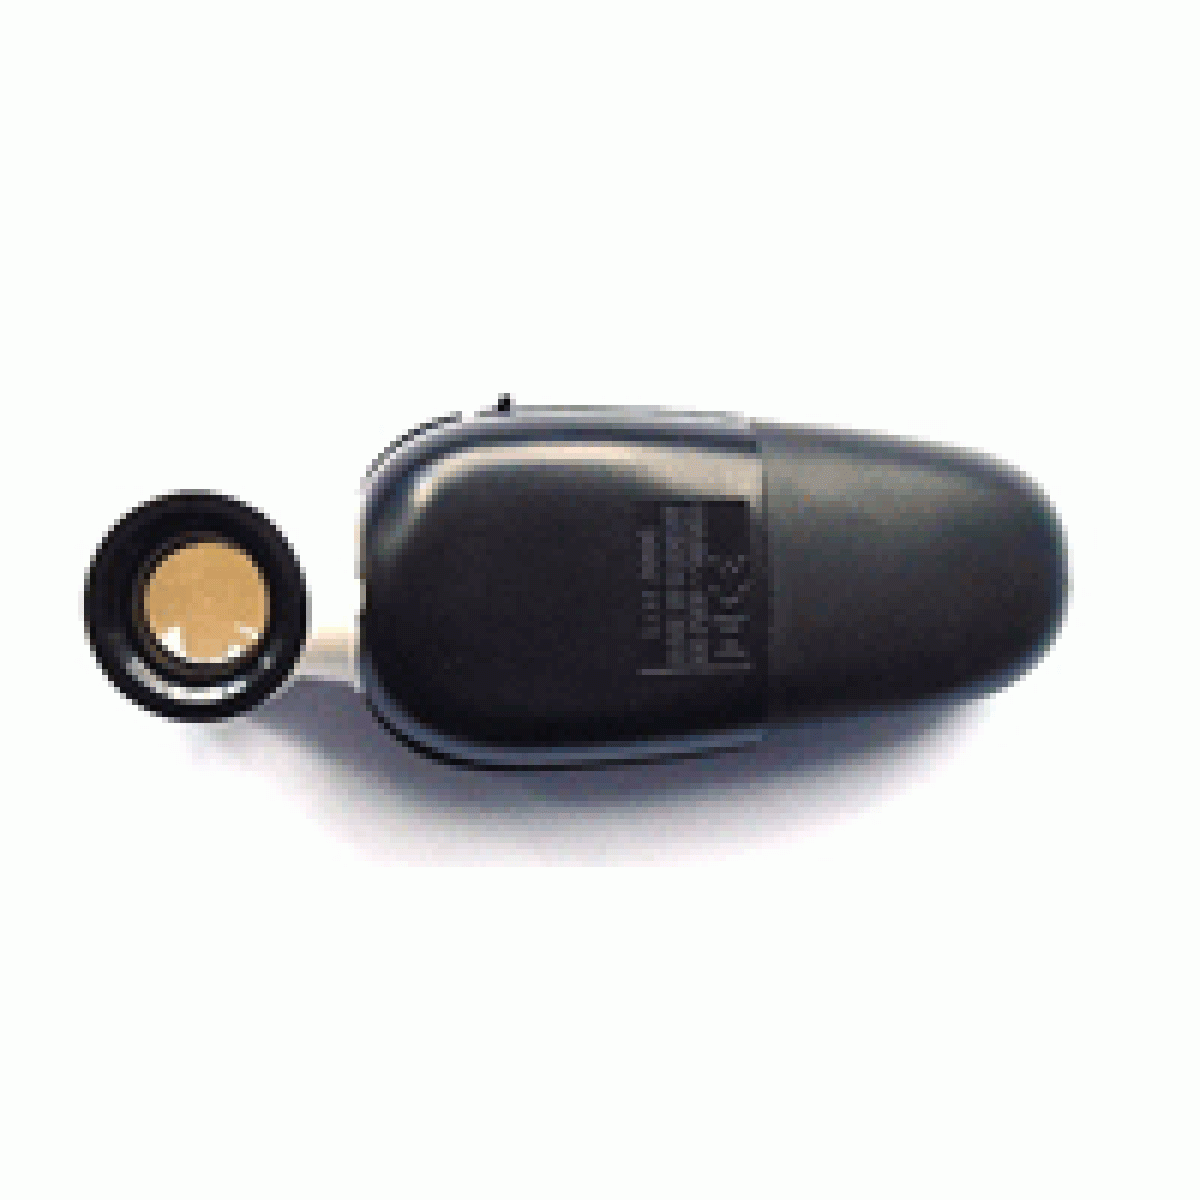 LED 2000 - Magnifier with battery light